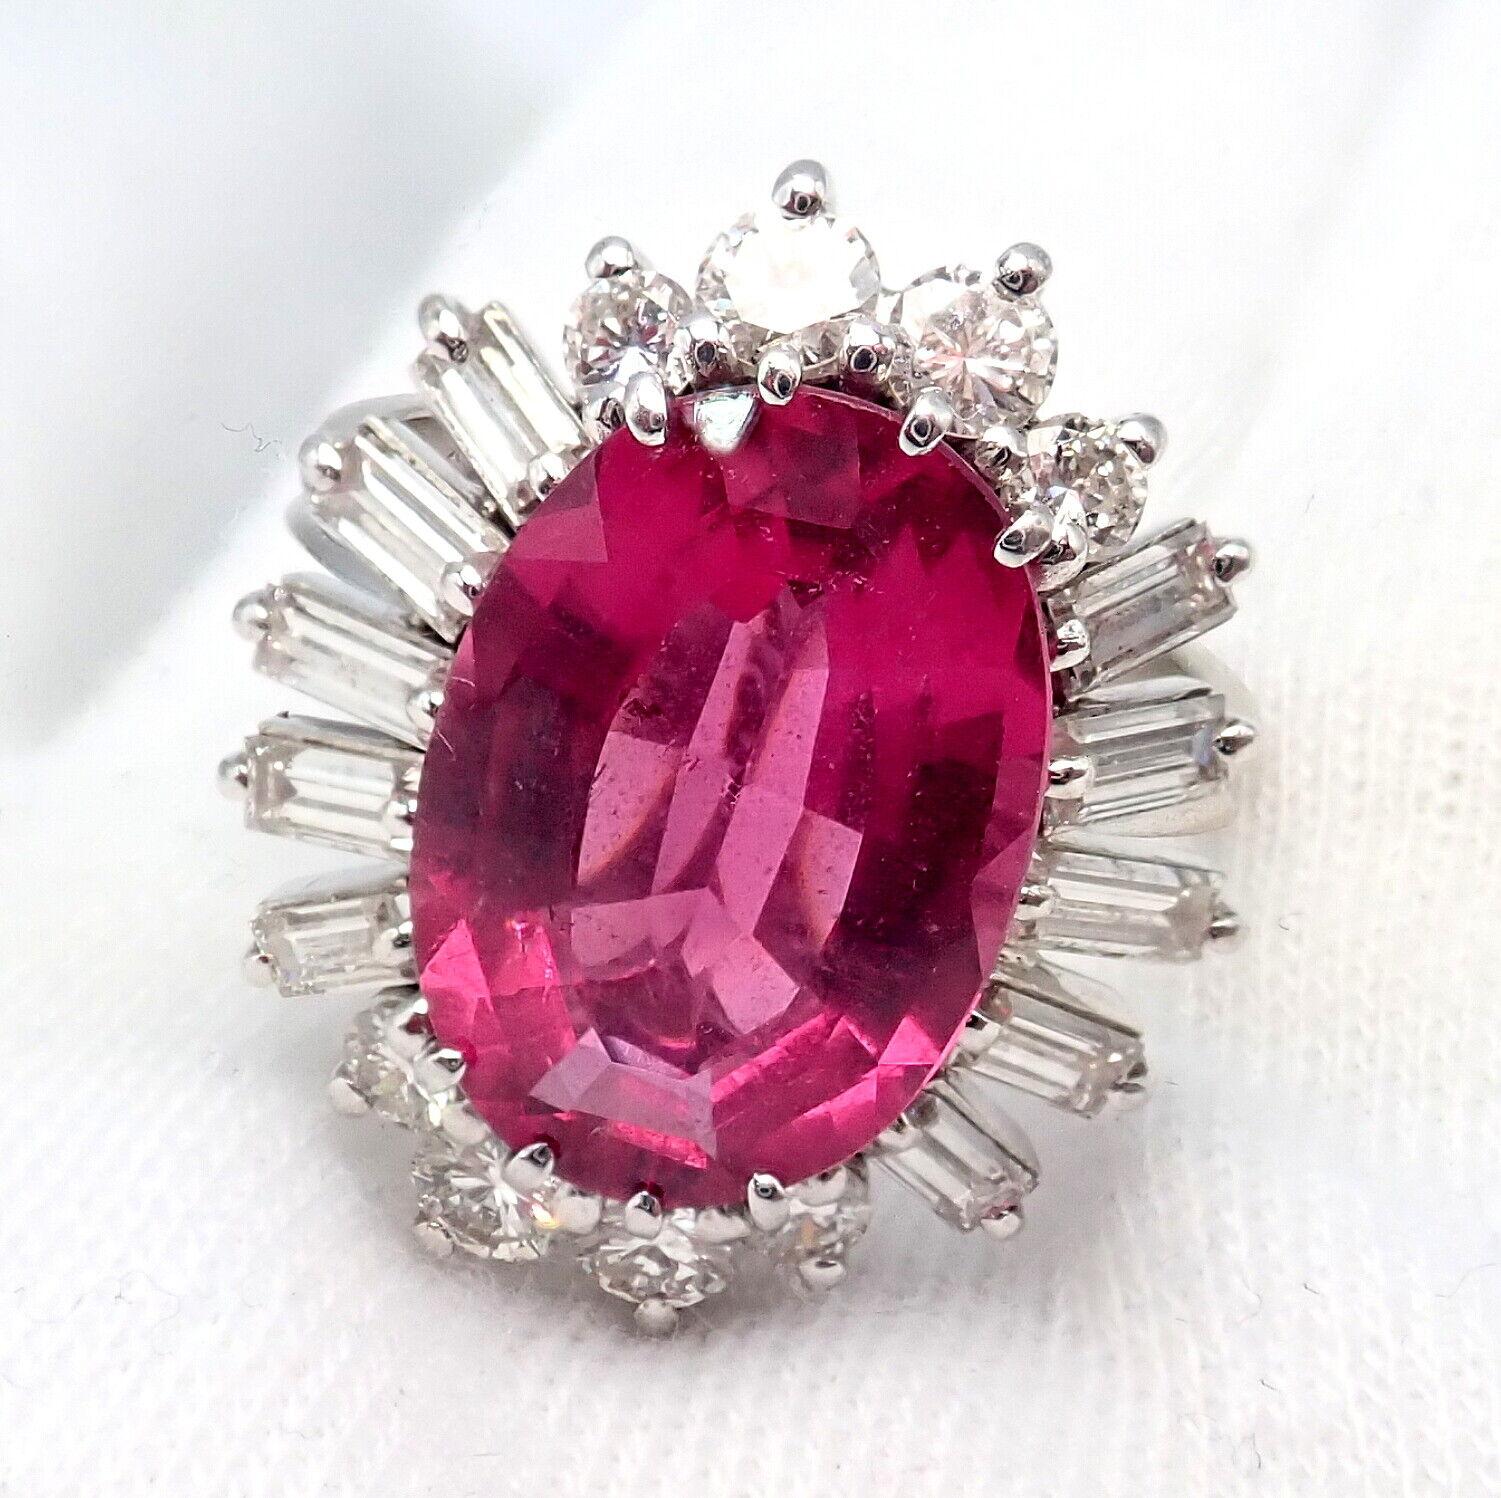 H. Stern Diamond Pink Tourmaline White Gold Ring And Earrings Set For Sale 5